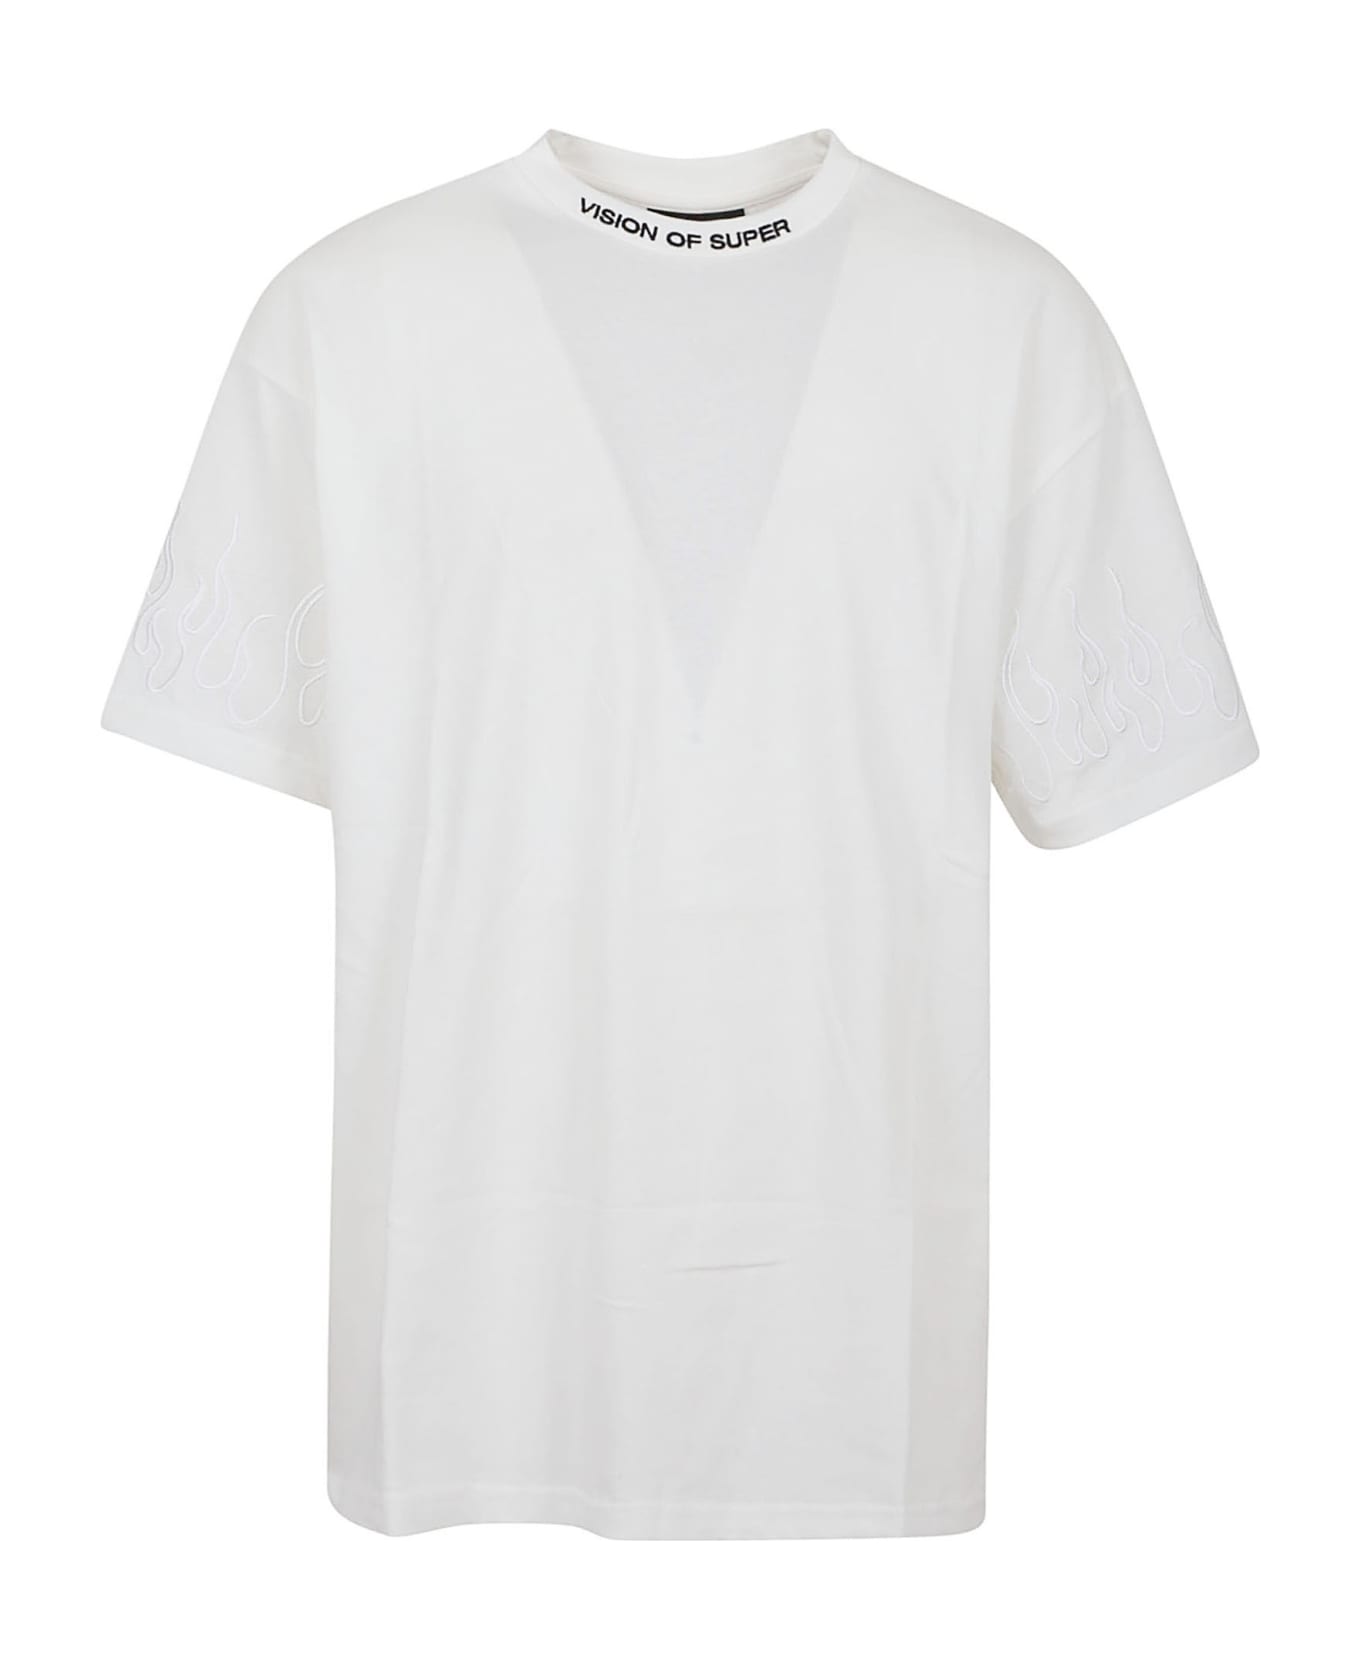 Vision of Super White Tshirt With White Embroidered Flames - White シャツ